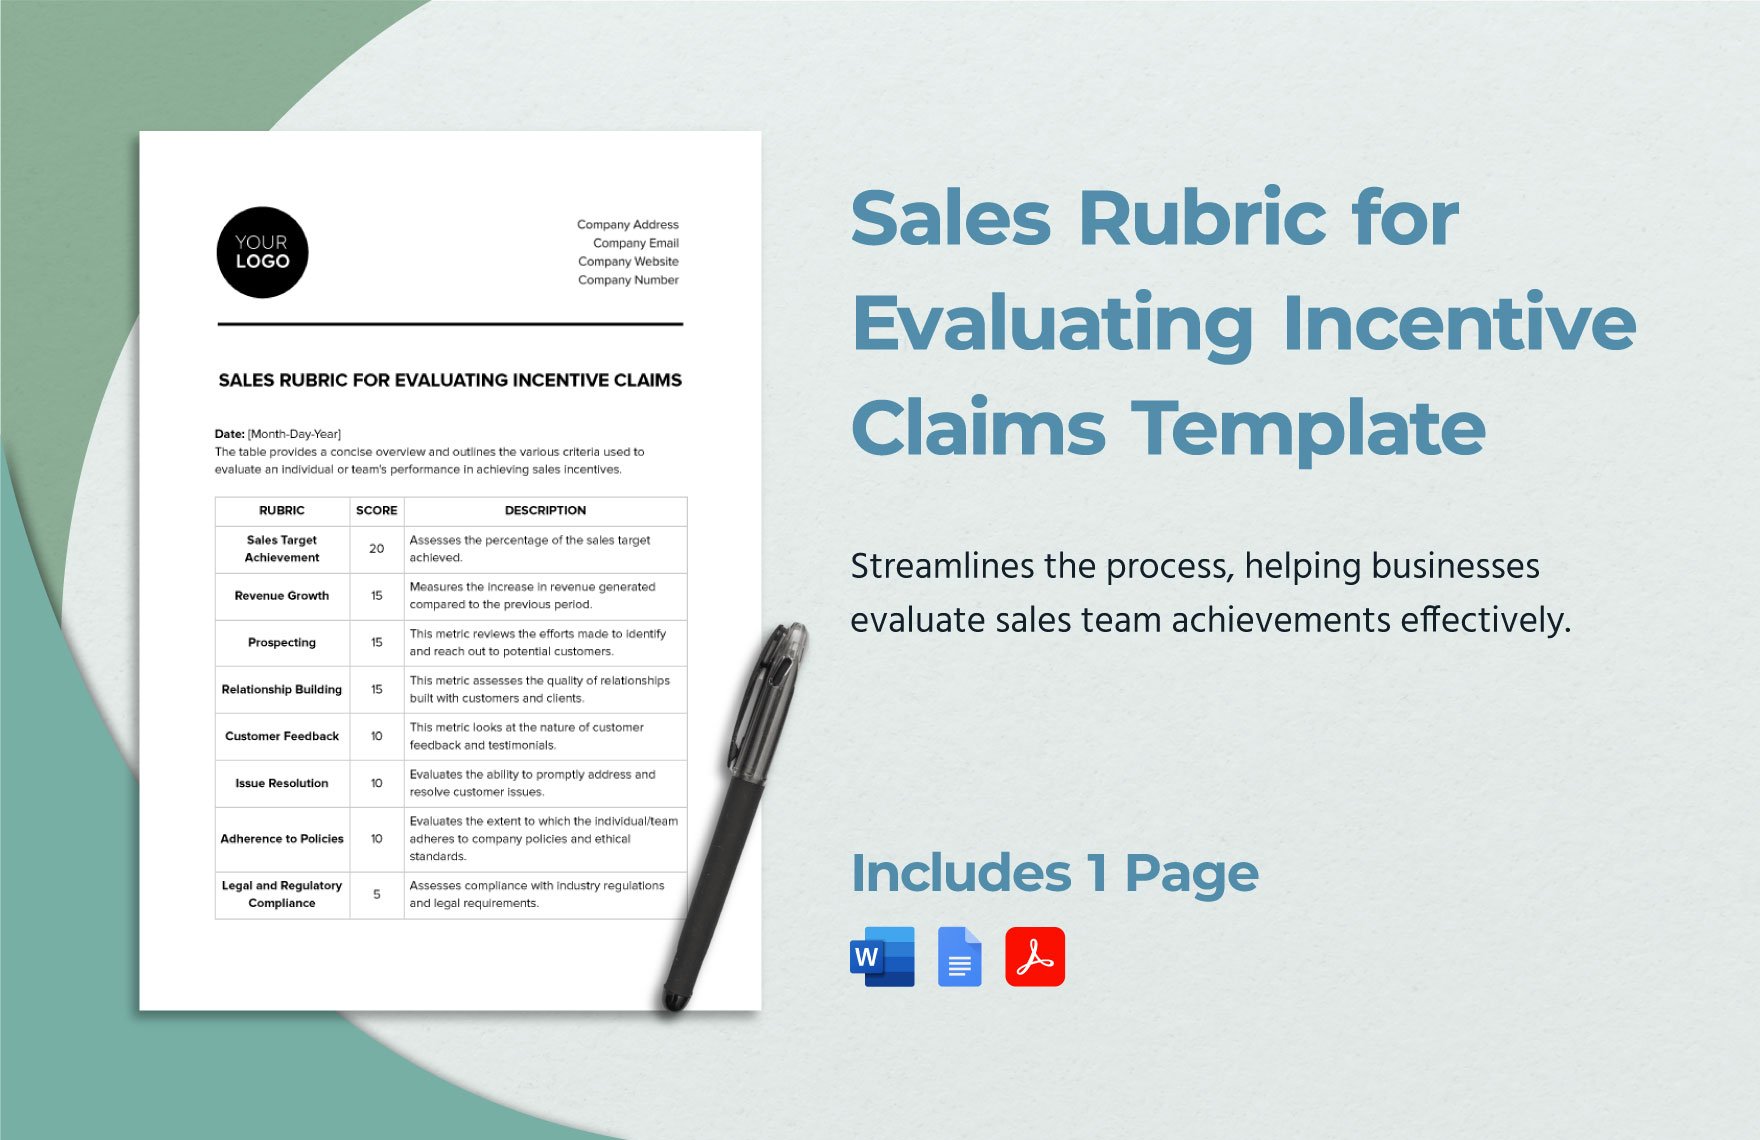 Sales Rubric for Evaluating Incentive Claims Template in Word, Google Docs, PDF